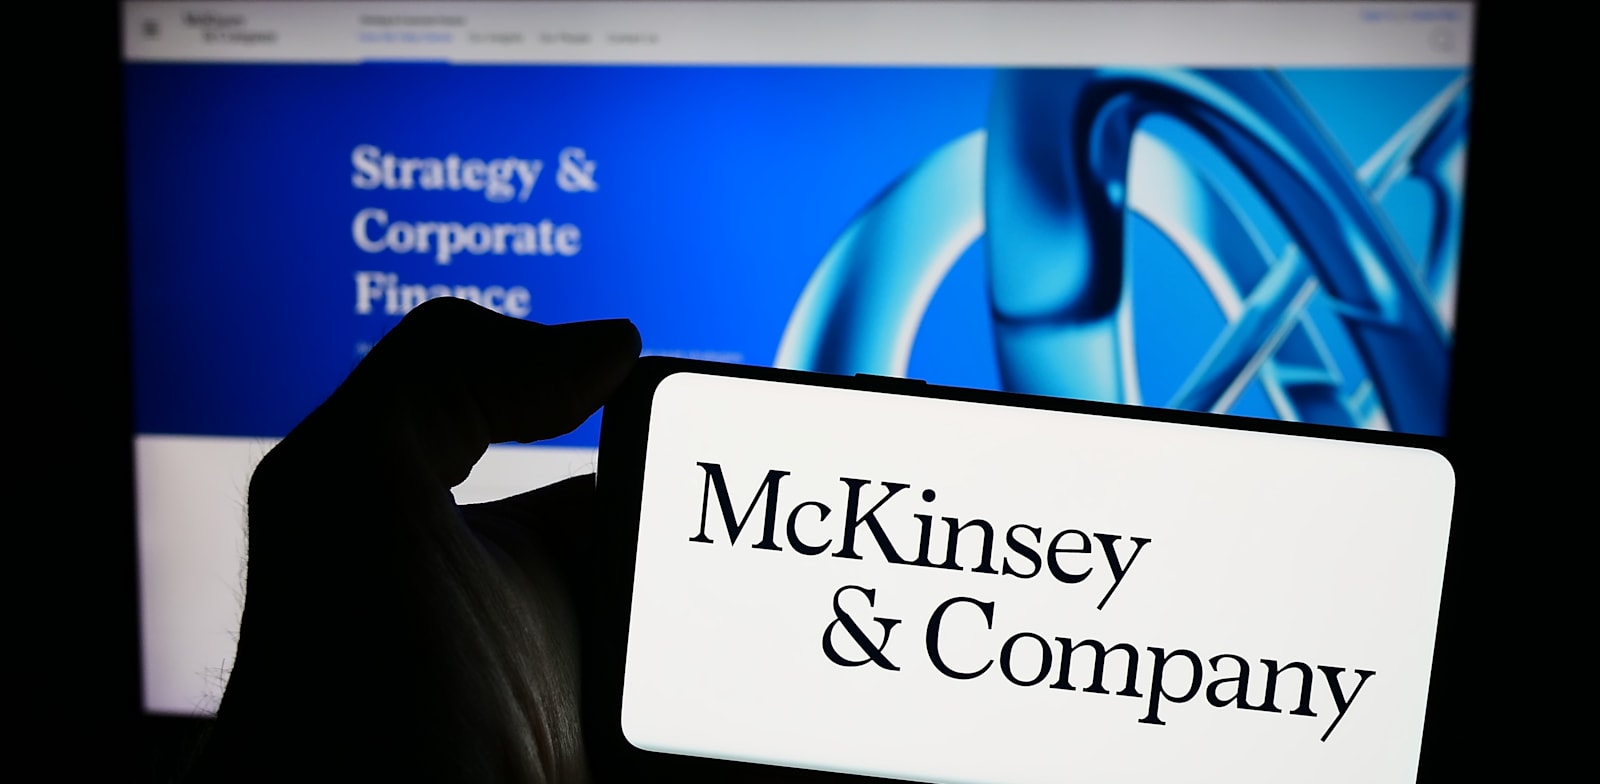 Because of the opioid affair: McKinsey under criminal investigation in the US